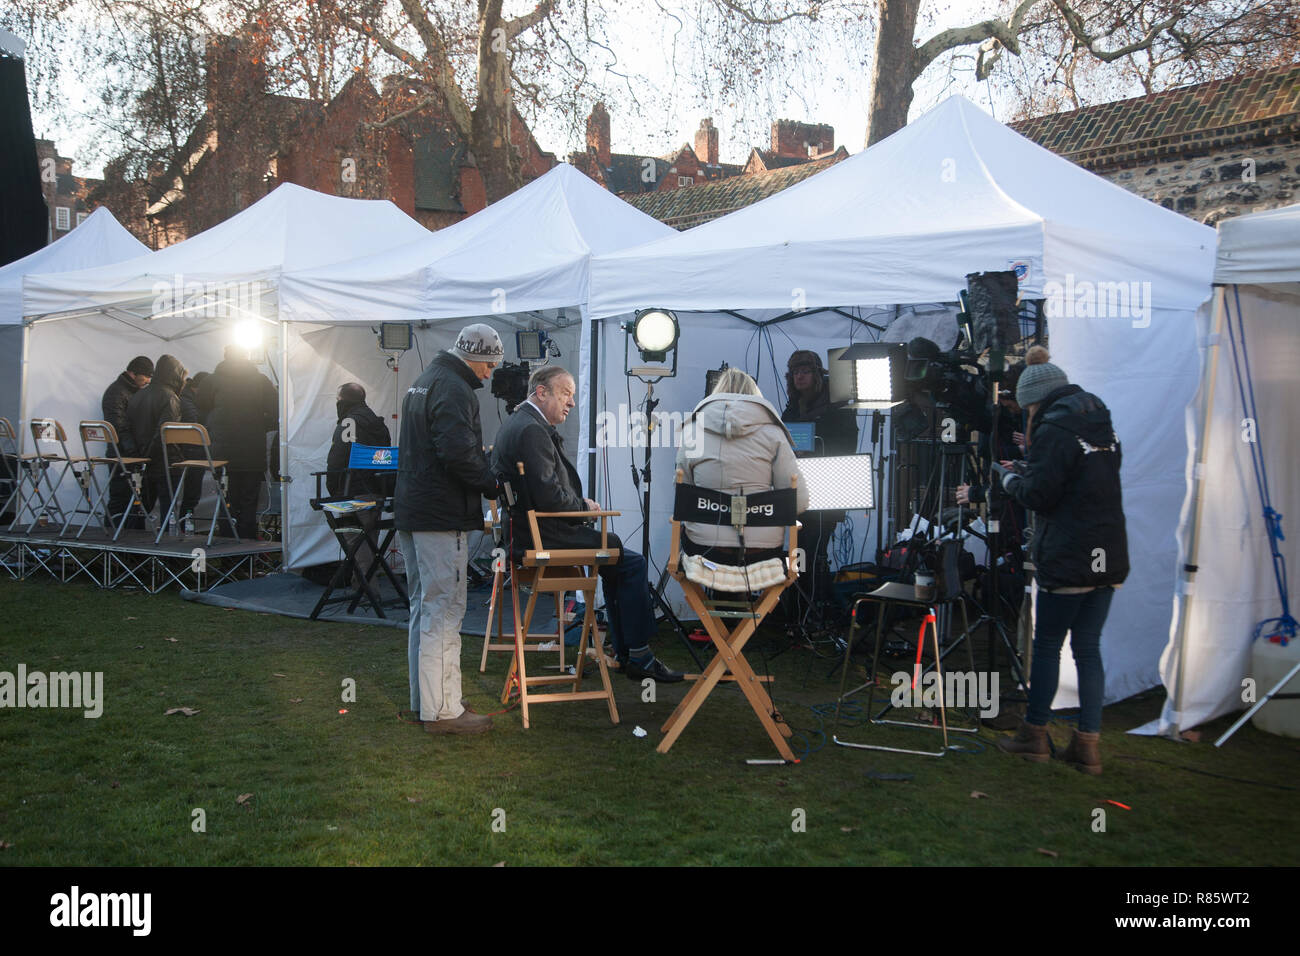 London UK. 13th December 2018. Special erected Media tents used for  the political coverage of the Brexit crisis by national and international news services at College Green Parliament as Prime Minister  a day after Prime Minister Theresa May won a confidence vote by 200-117 and will not be challenged for 12 months under the rules of the Conservative Party Credit: amer ghazzal/Alamy Live News Stock Photo